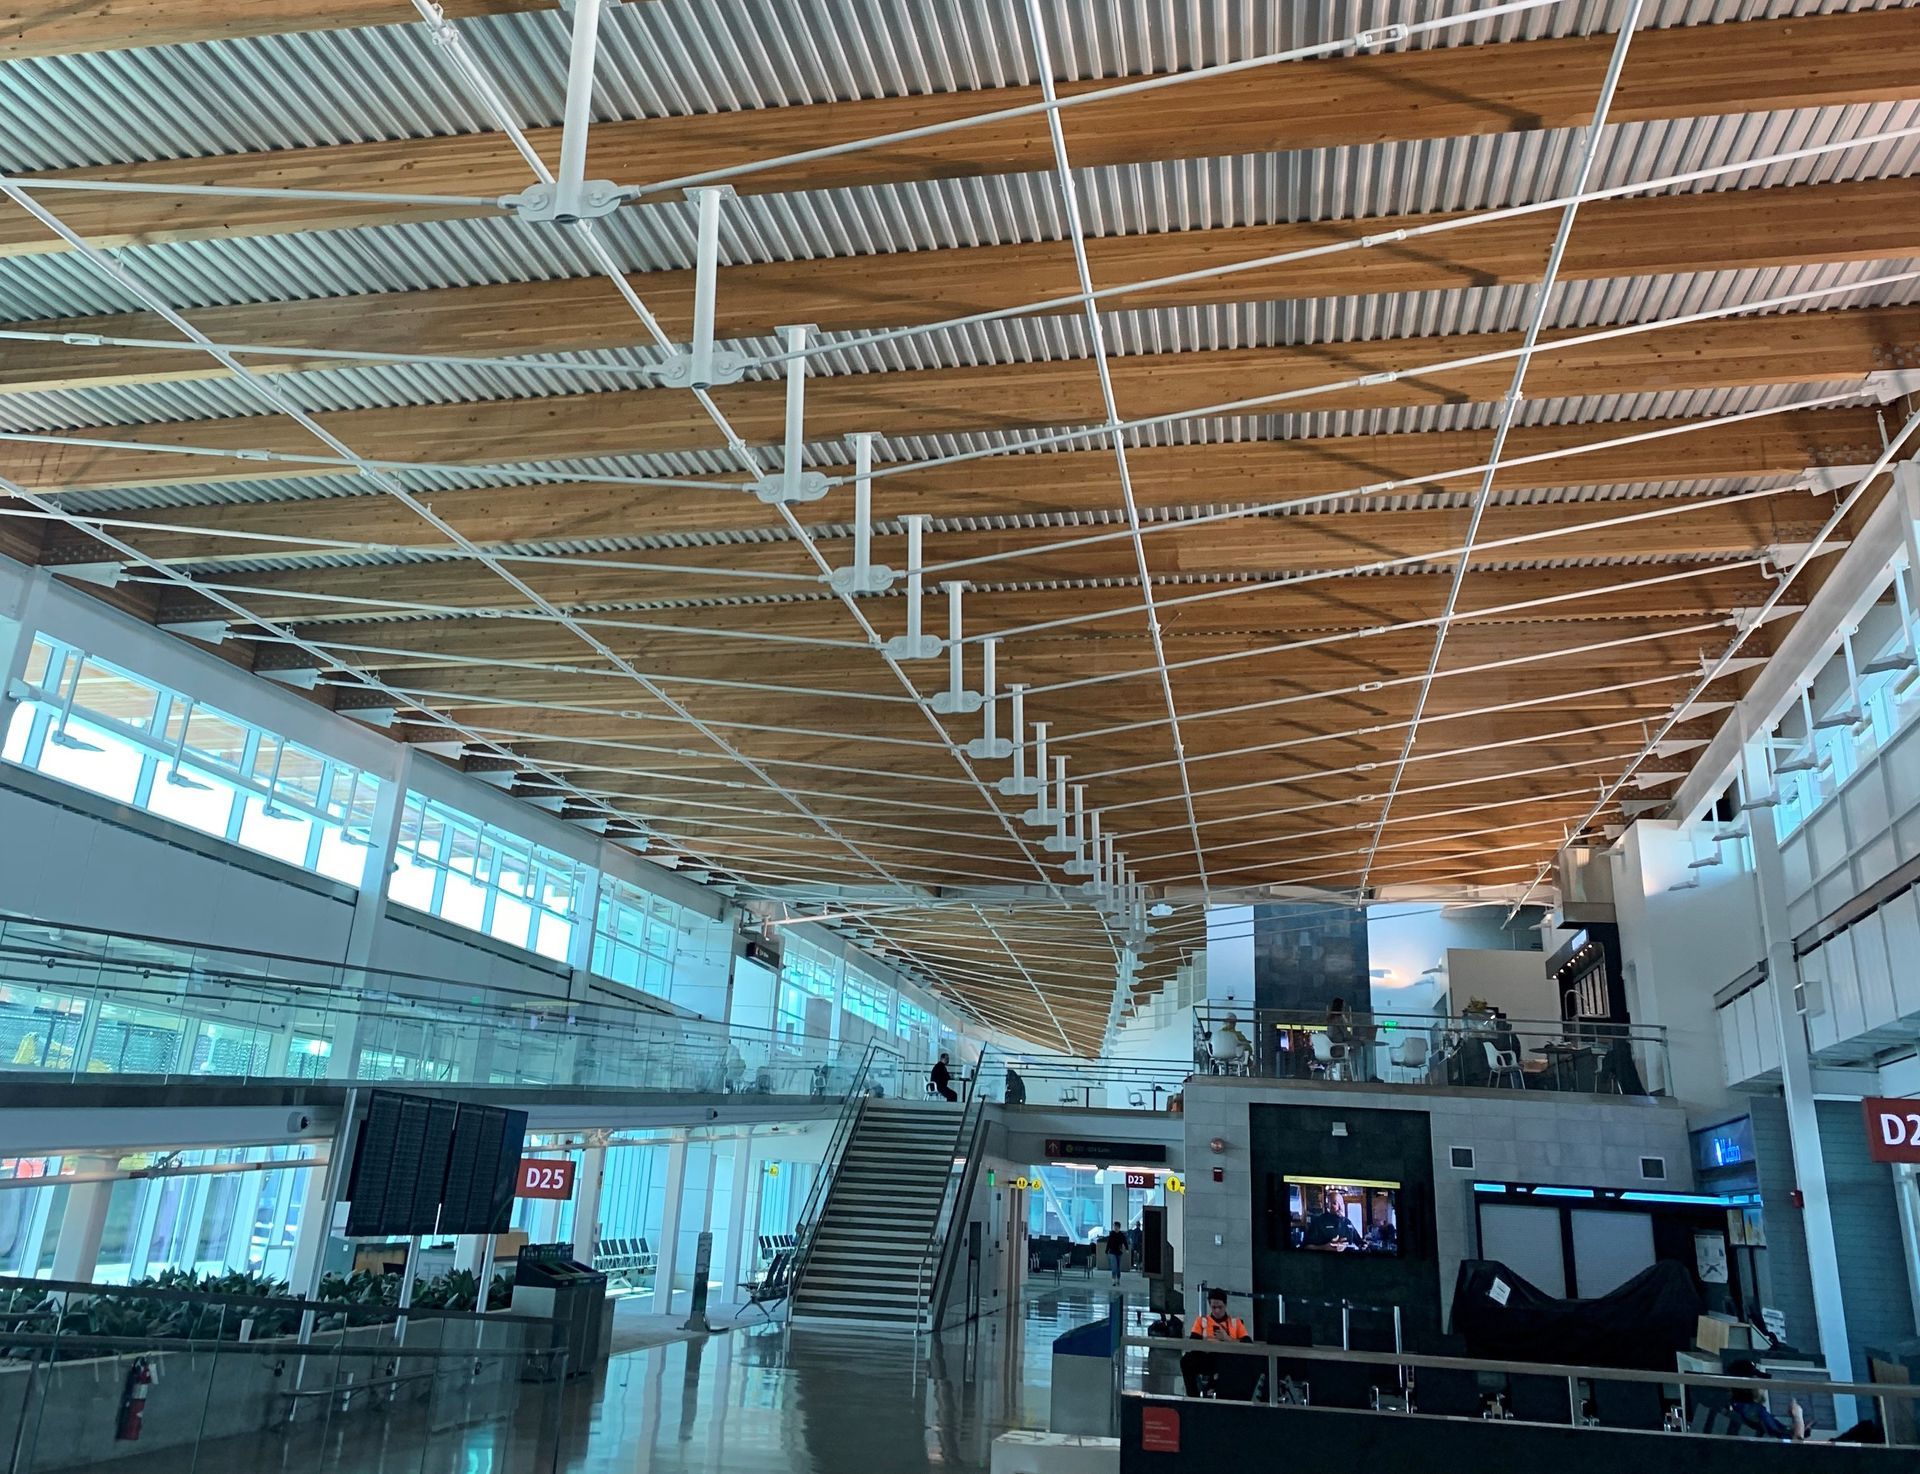 ceiling of airport showing post tension